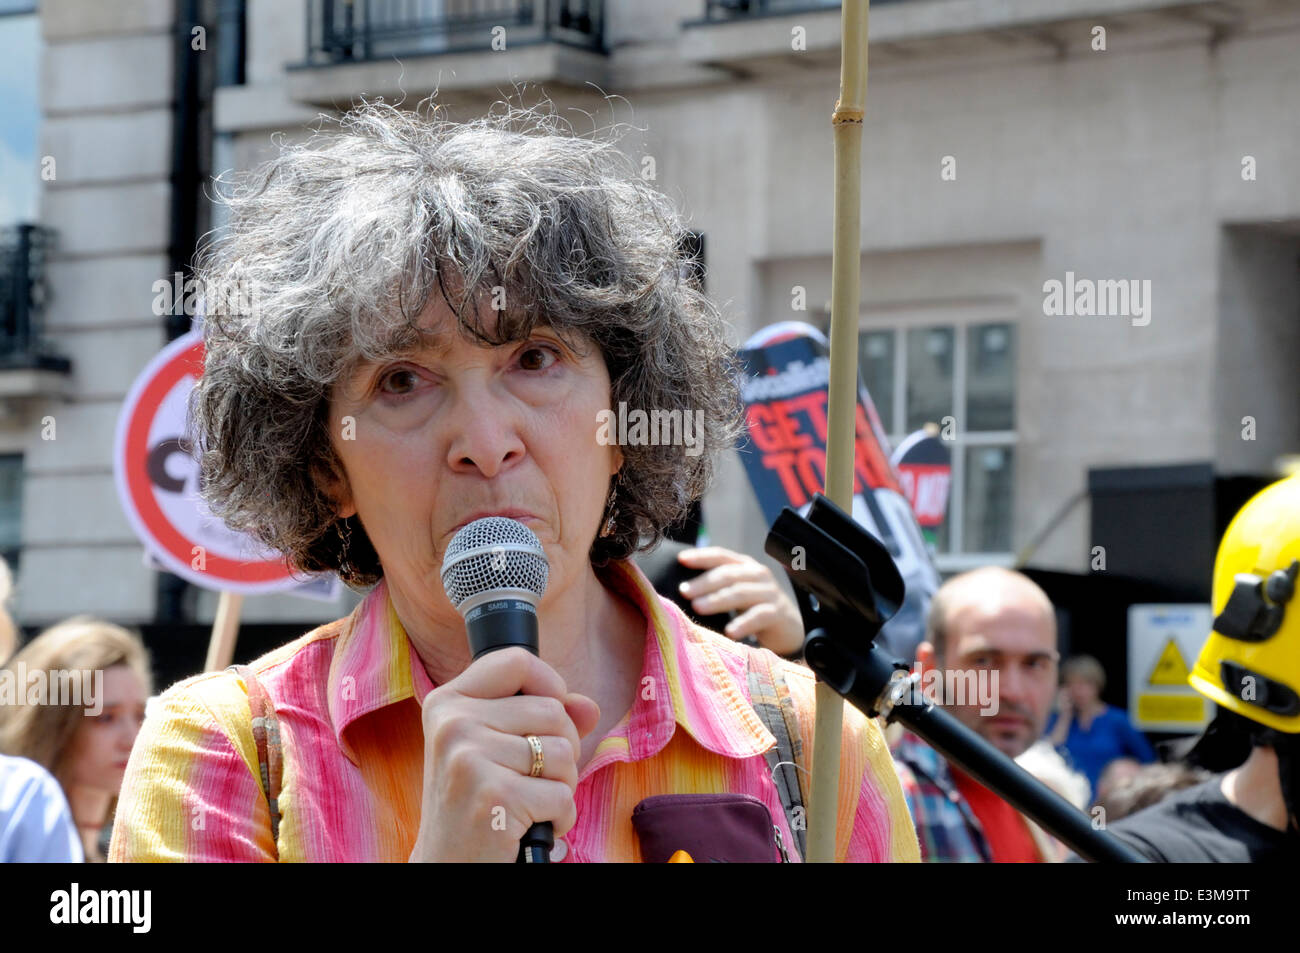 Barbara Jacobson - Barnet Alliance for Public Services (BAPS) - speaking at the People's Assembly demonstration London June 2014 Stock Photo